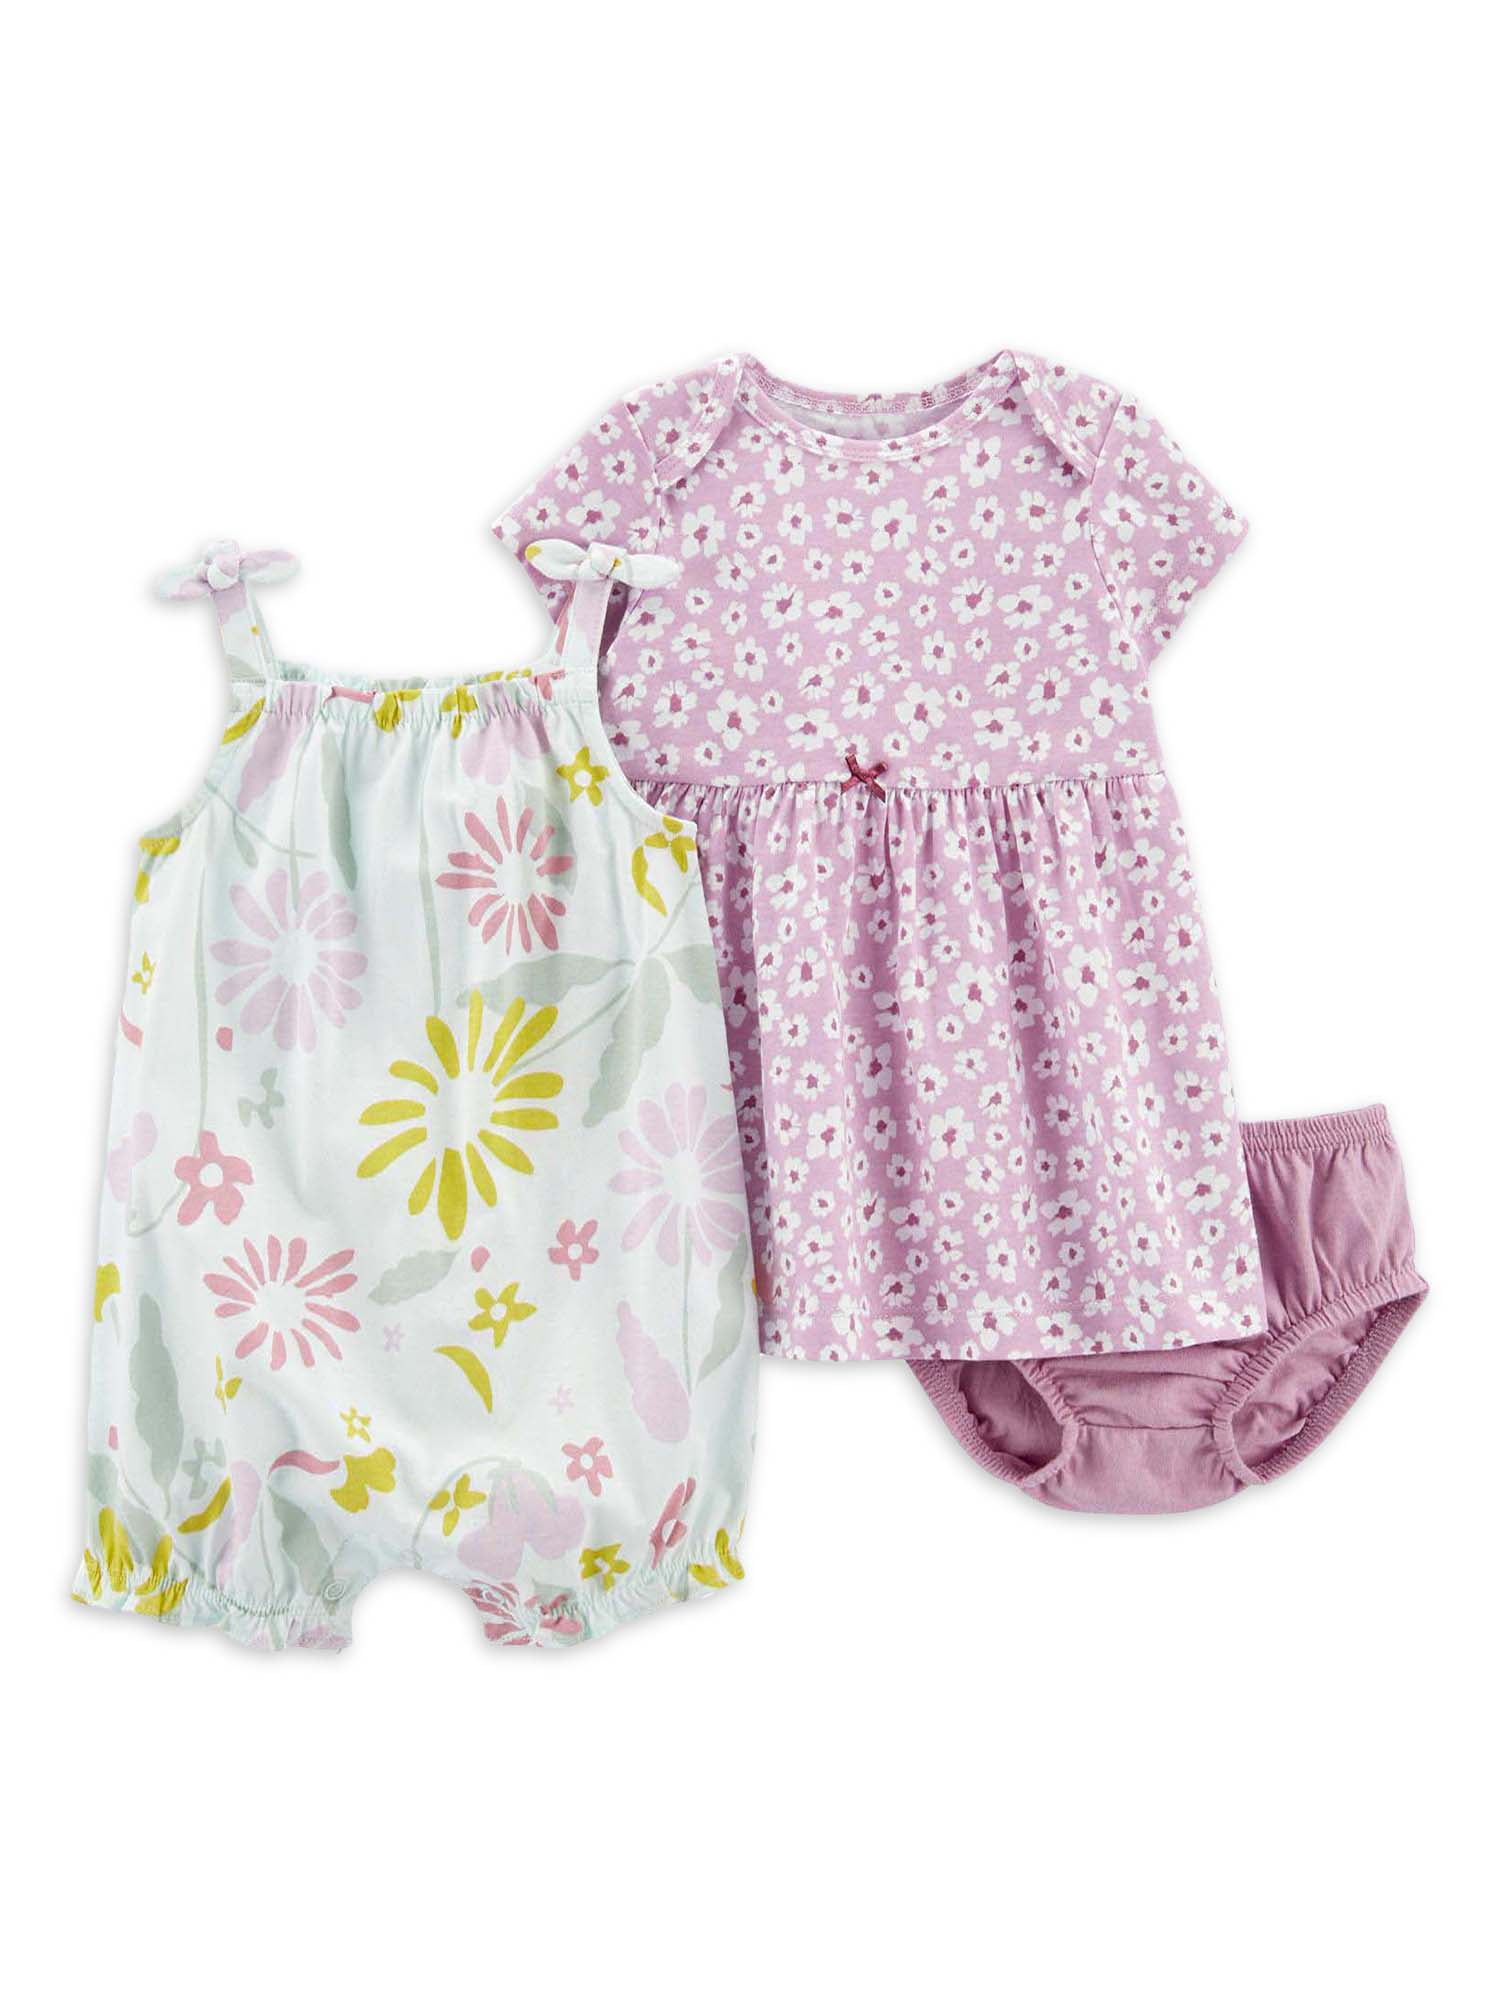 Carter's Child of Mine Baby Girl Romper and Dress Set, 3-Piece, Sizes 0 ...